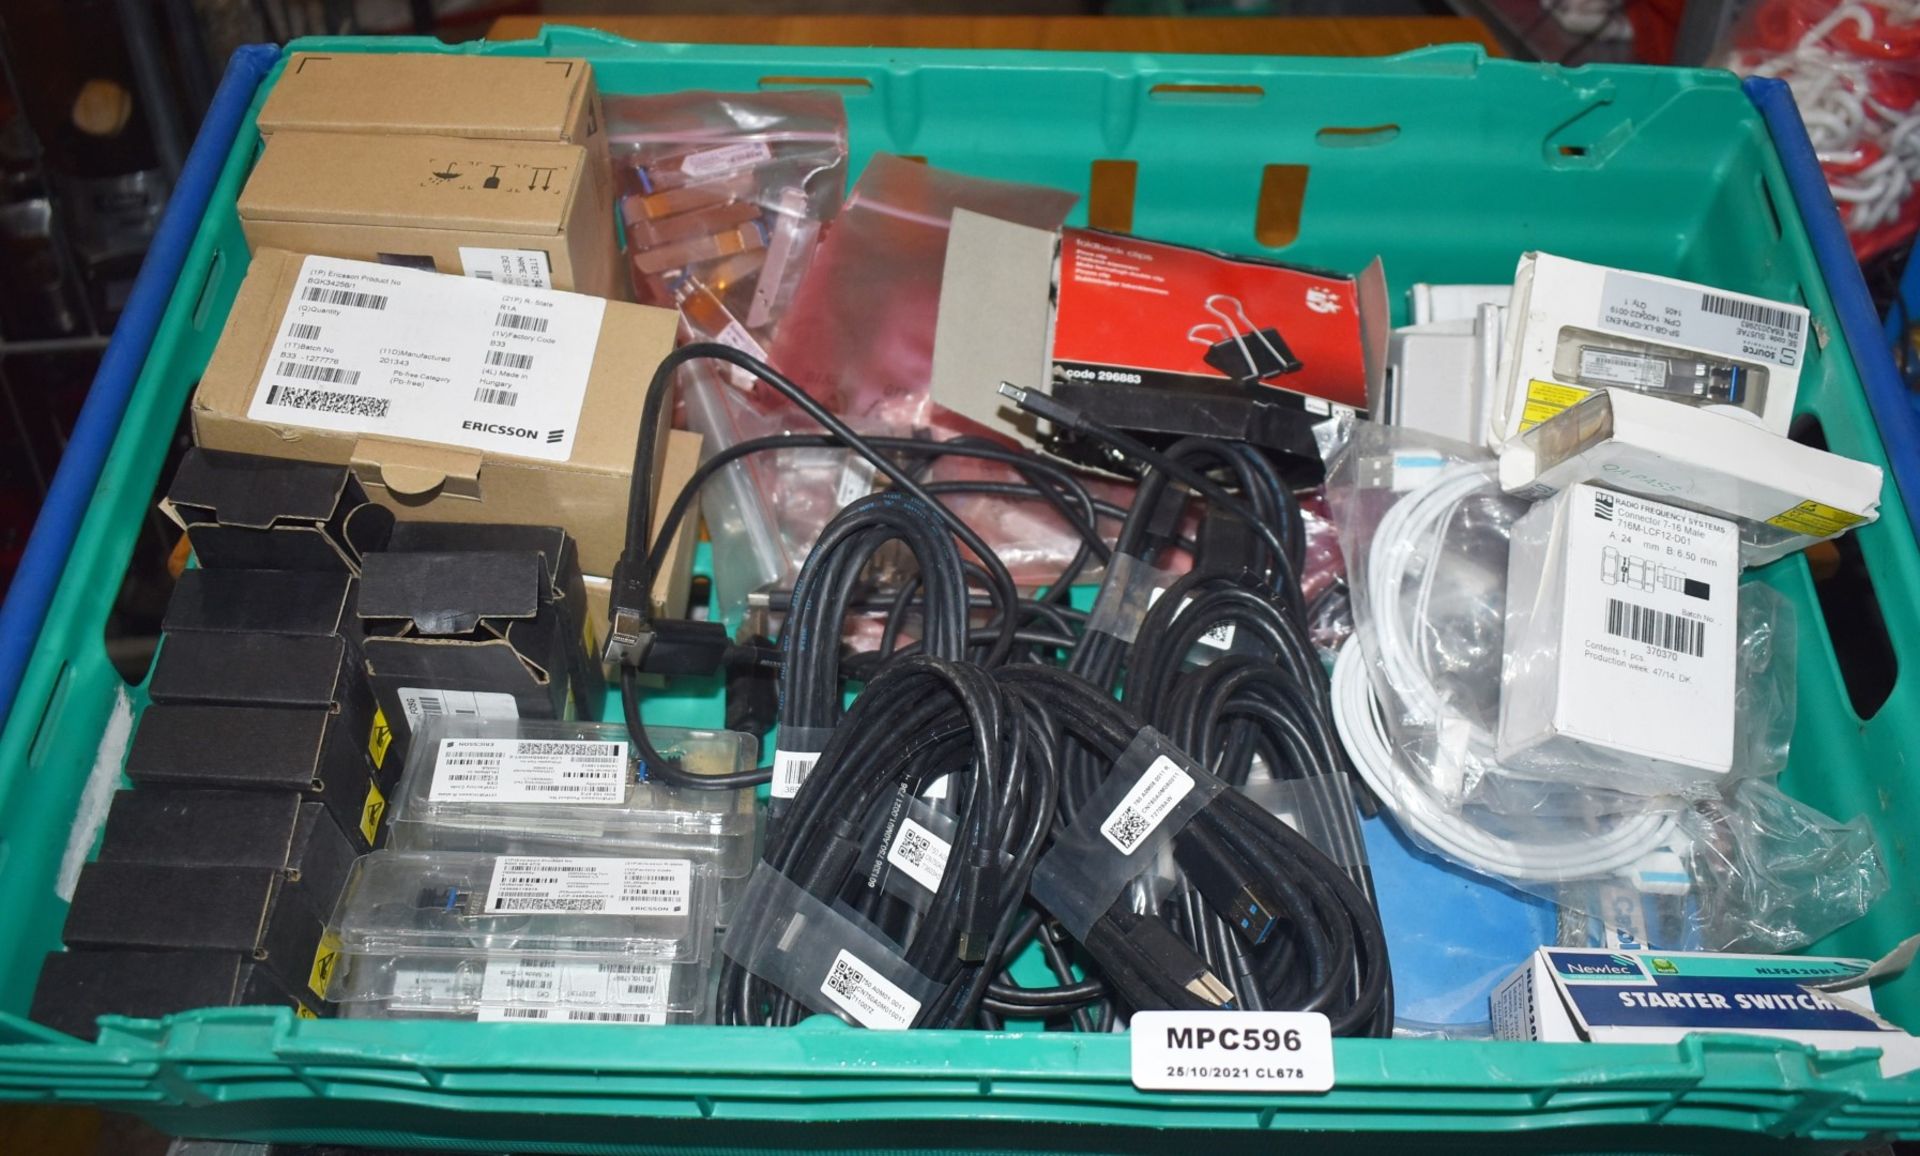 1 x Assorted Job Lot to Include Various Optical Transceivers, Ericsson Parts, Security Lock, USB3